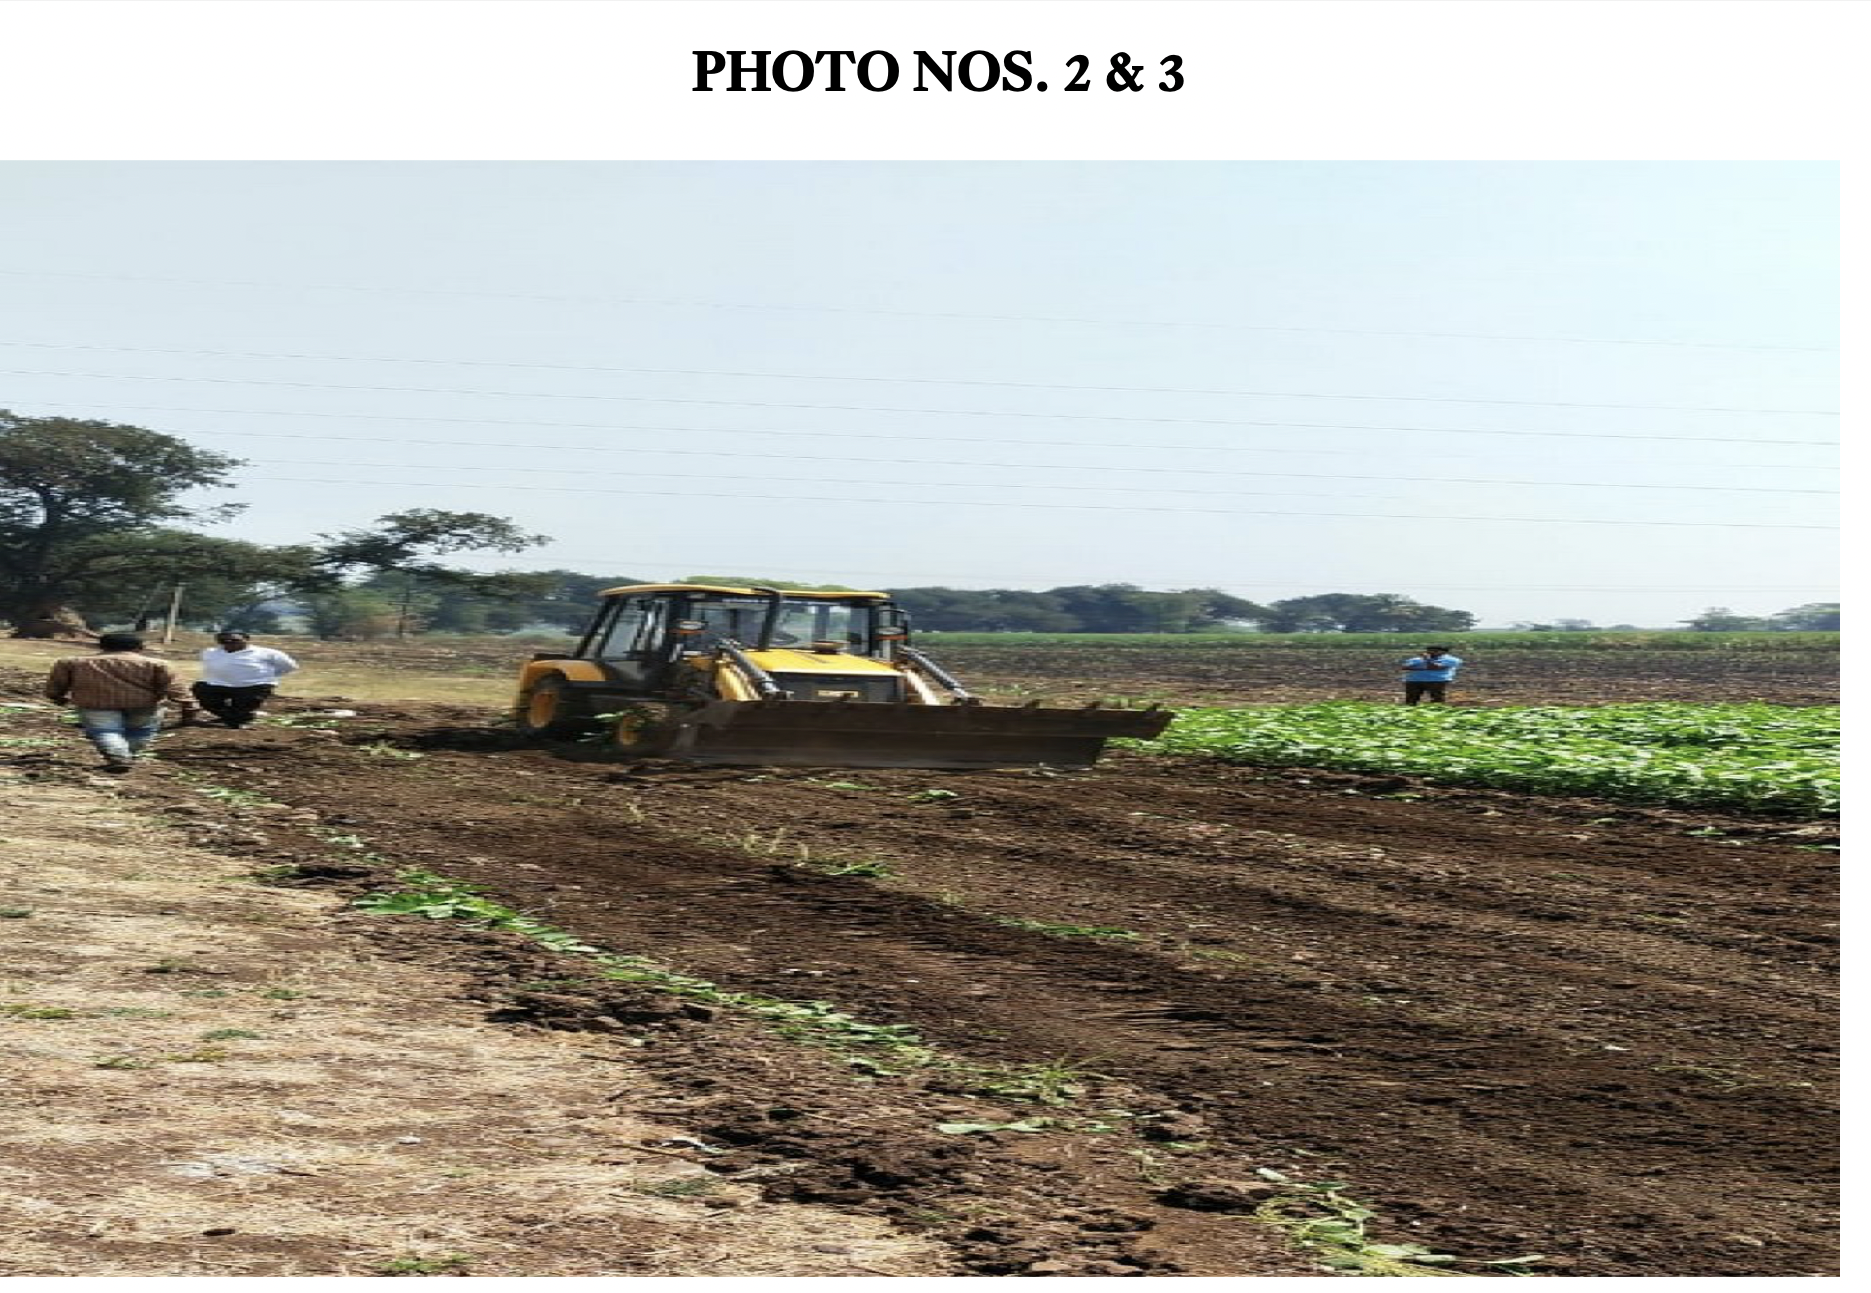 Photo annexed in the judgment showing petitioners crops being destroyed by civic officials